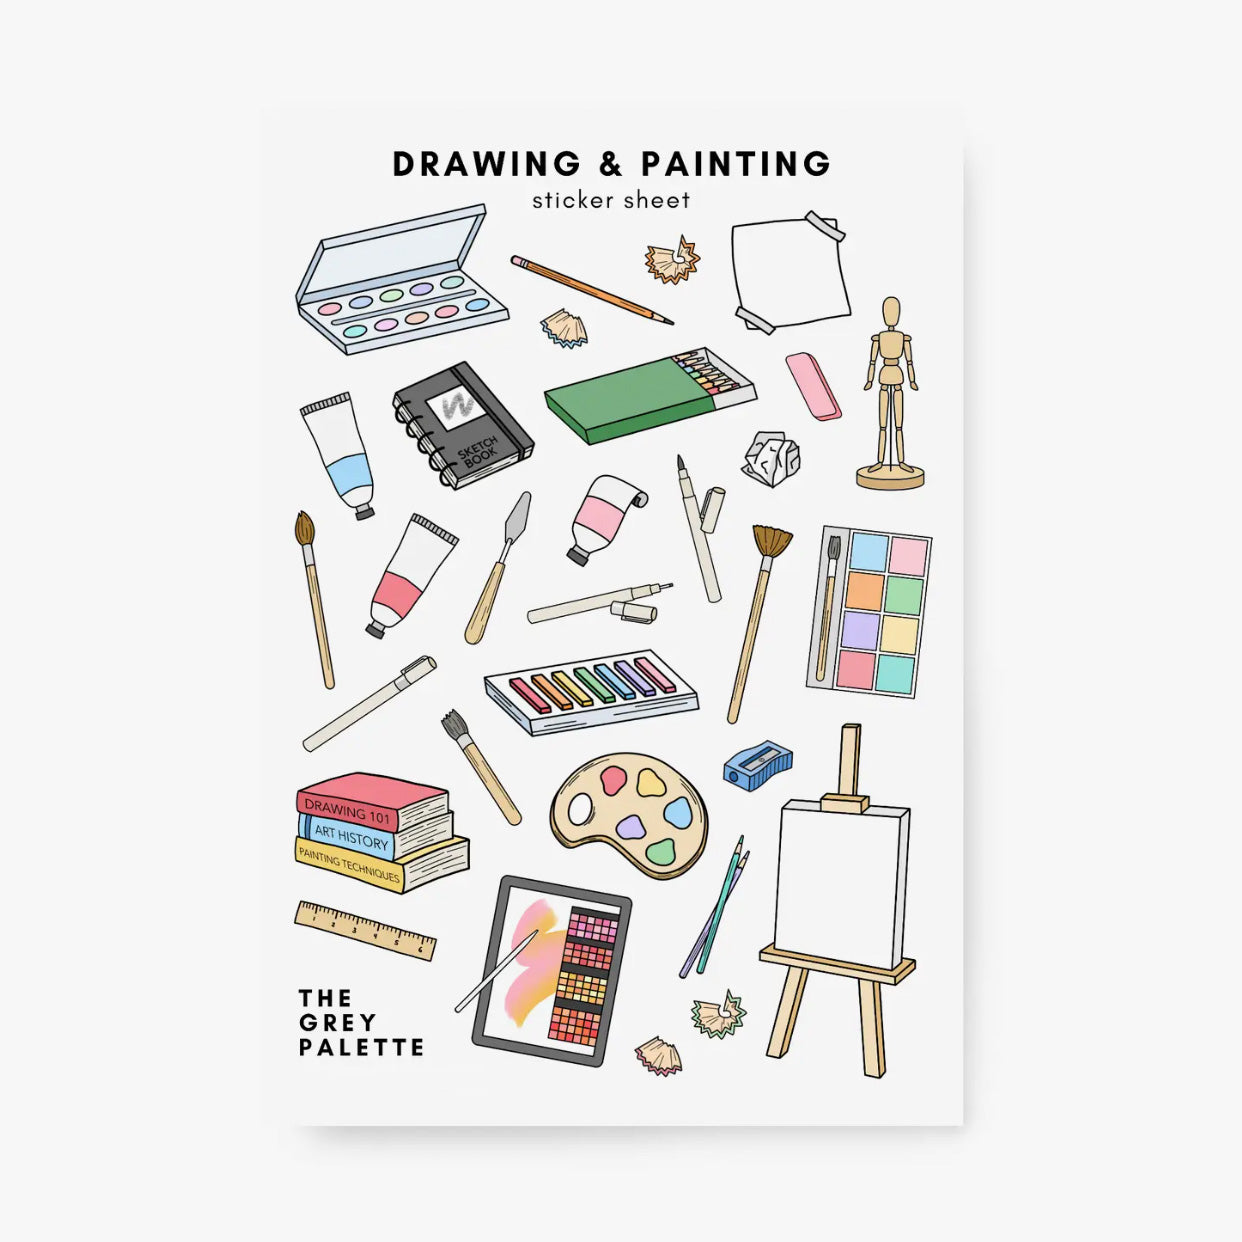 This sticker sheet freatures illusrations of paining and drawing tools perfect for a craft enthusiast or journaling addict. This sticker sheet is designed by The Grey Palette and sold at BBB Supplies Craft Shop.